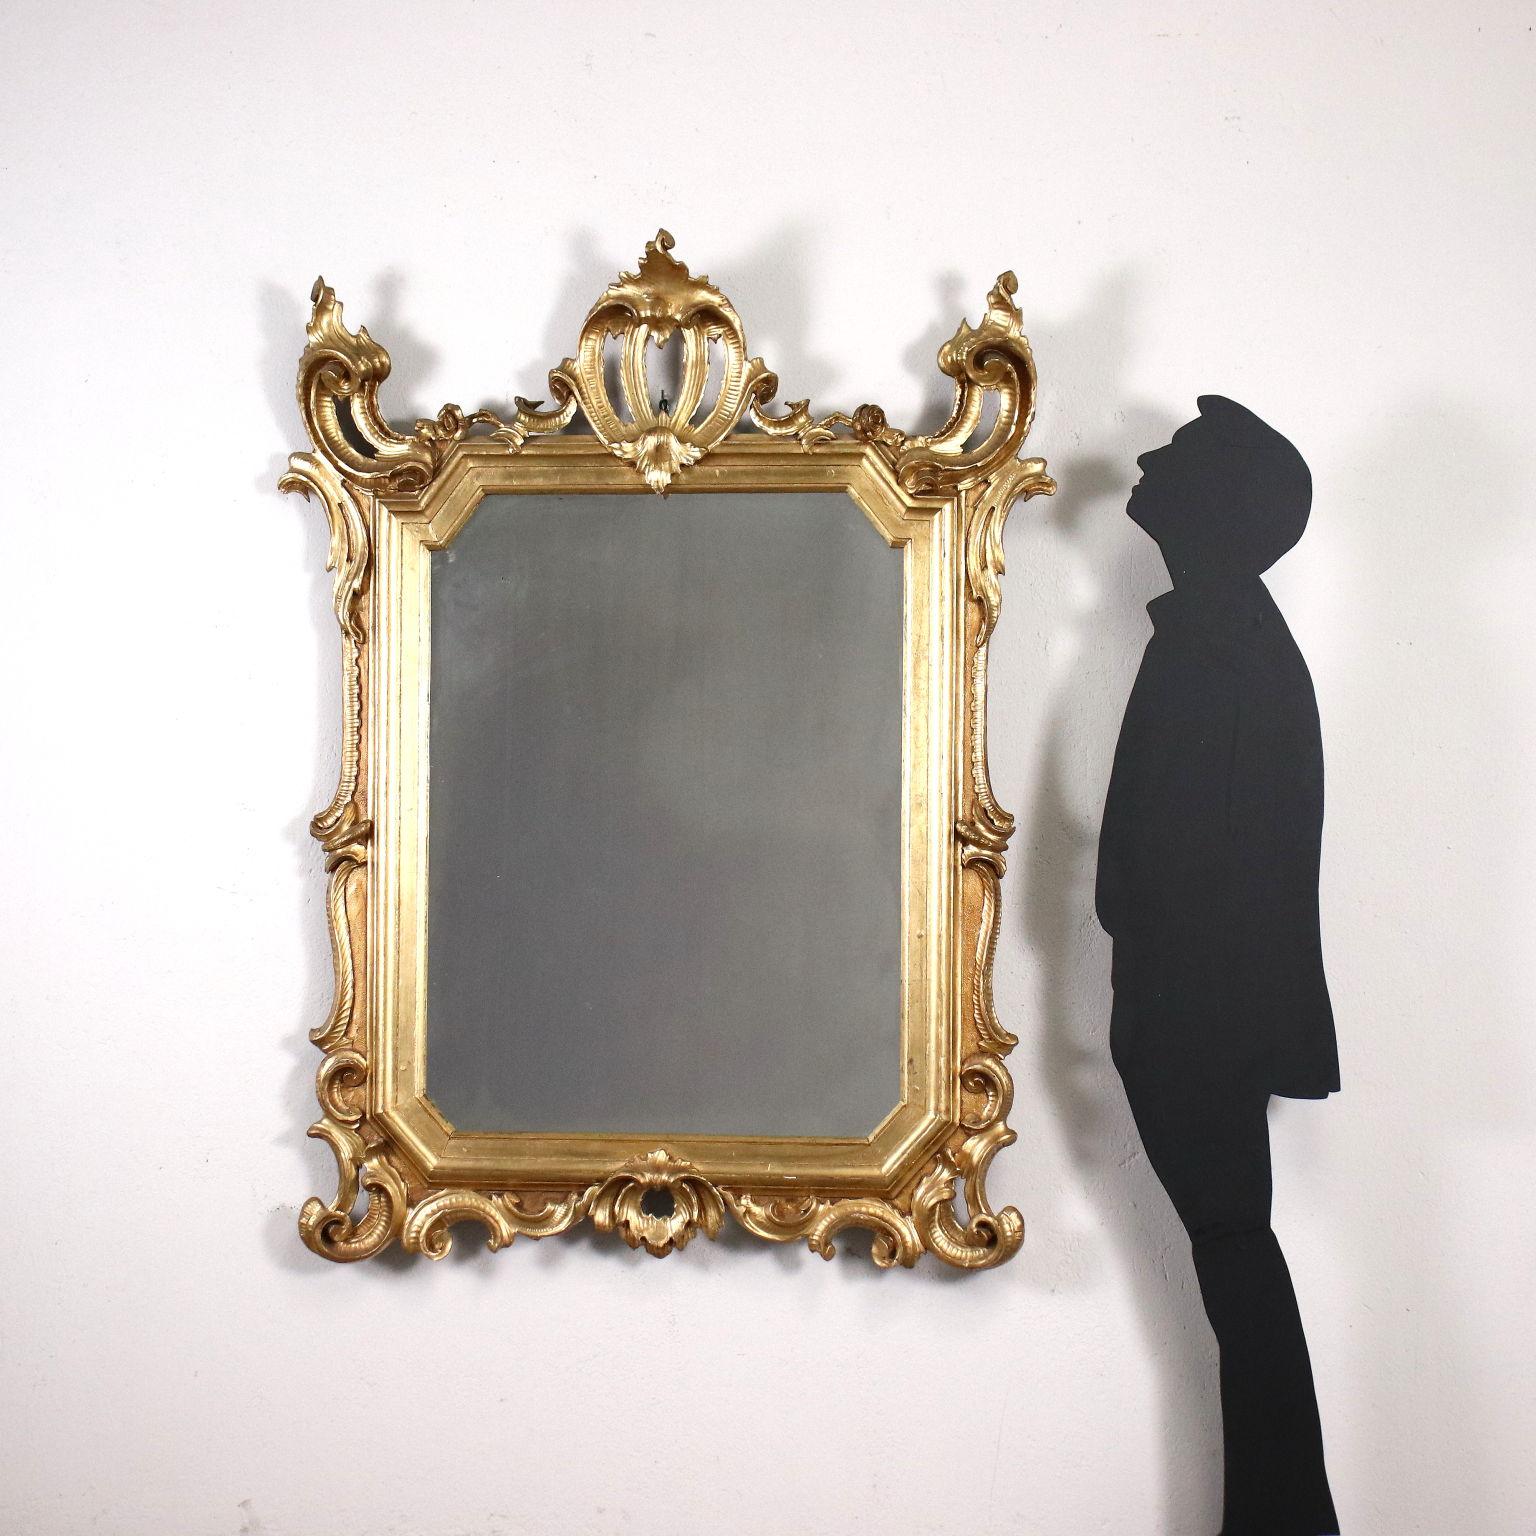 Eclectic mirror, the frame is carved with scrolls and rocaille motifs in Baroque style, entirely gilded.